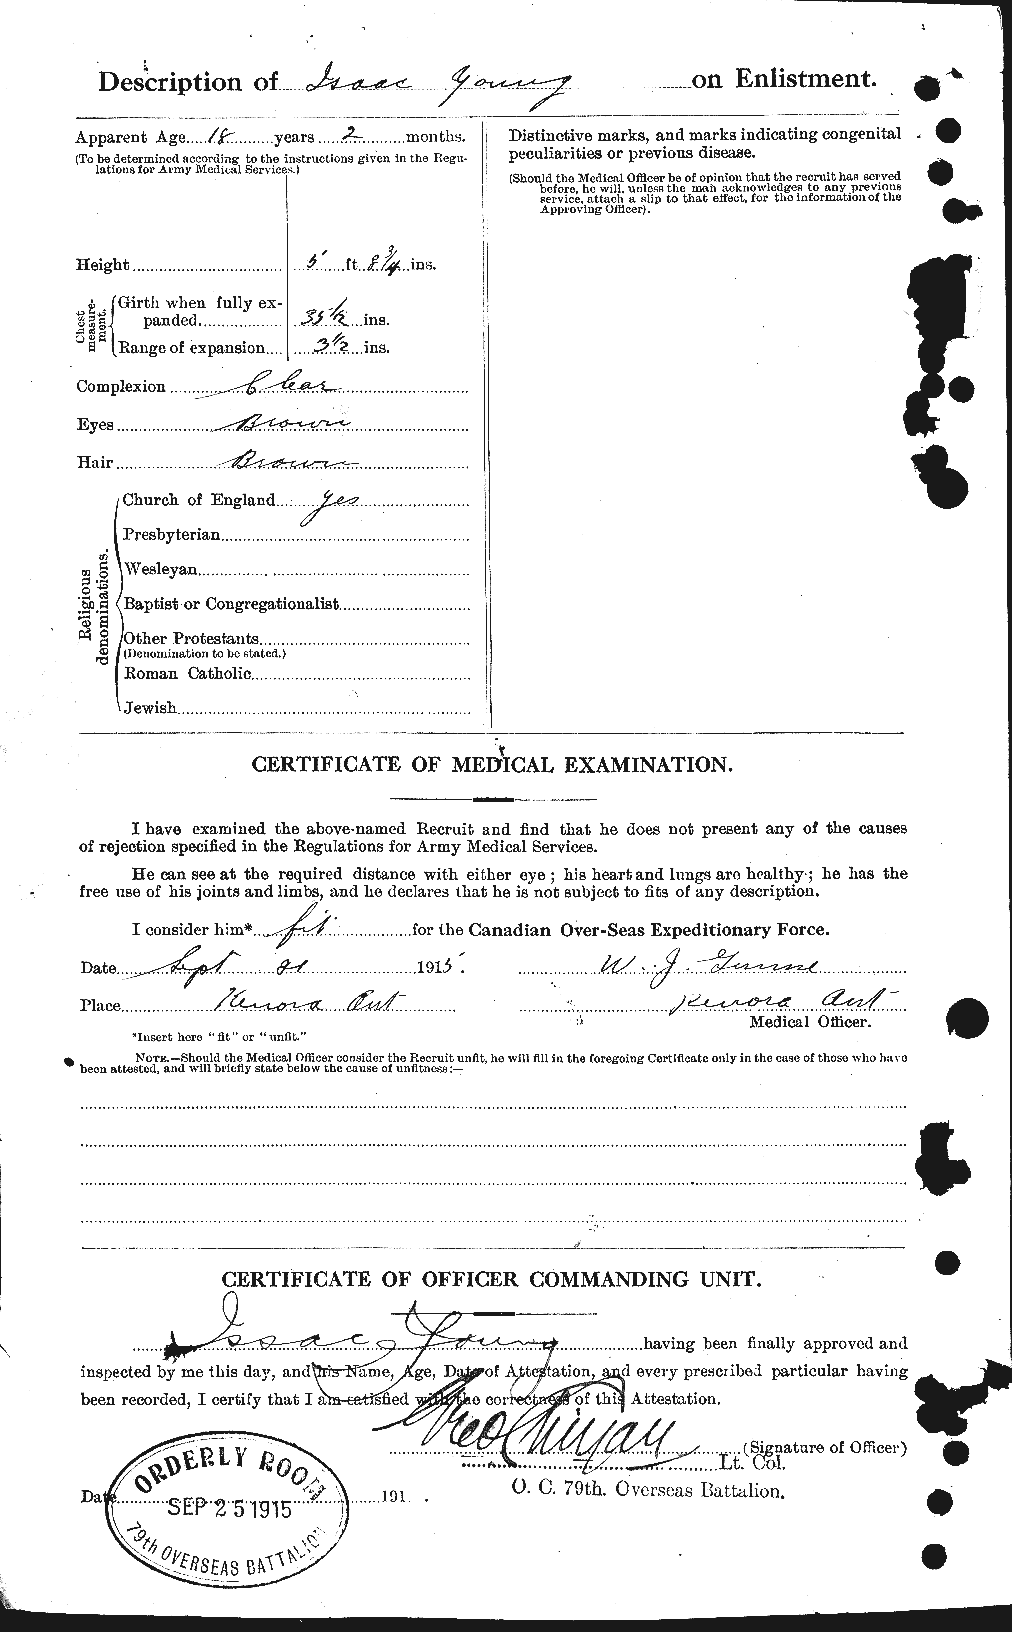 Personnel Records of the First World War - CEF 690582b